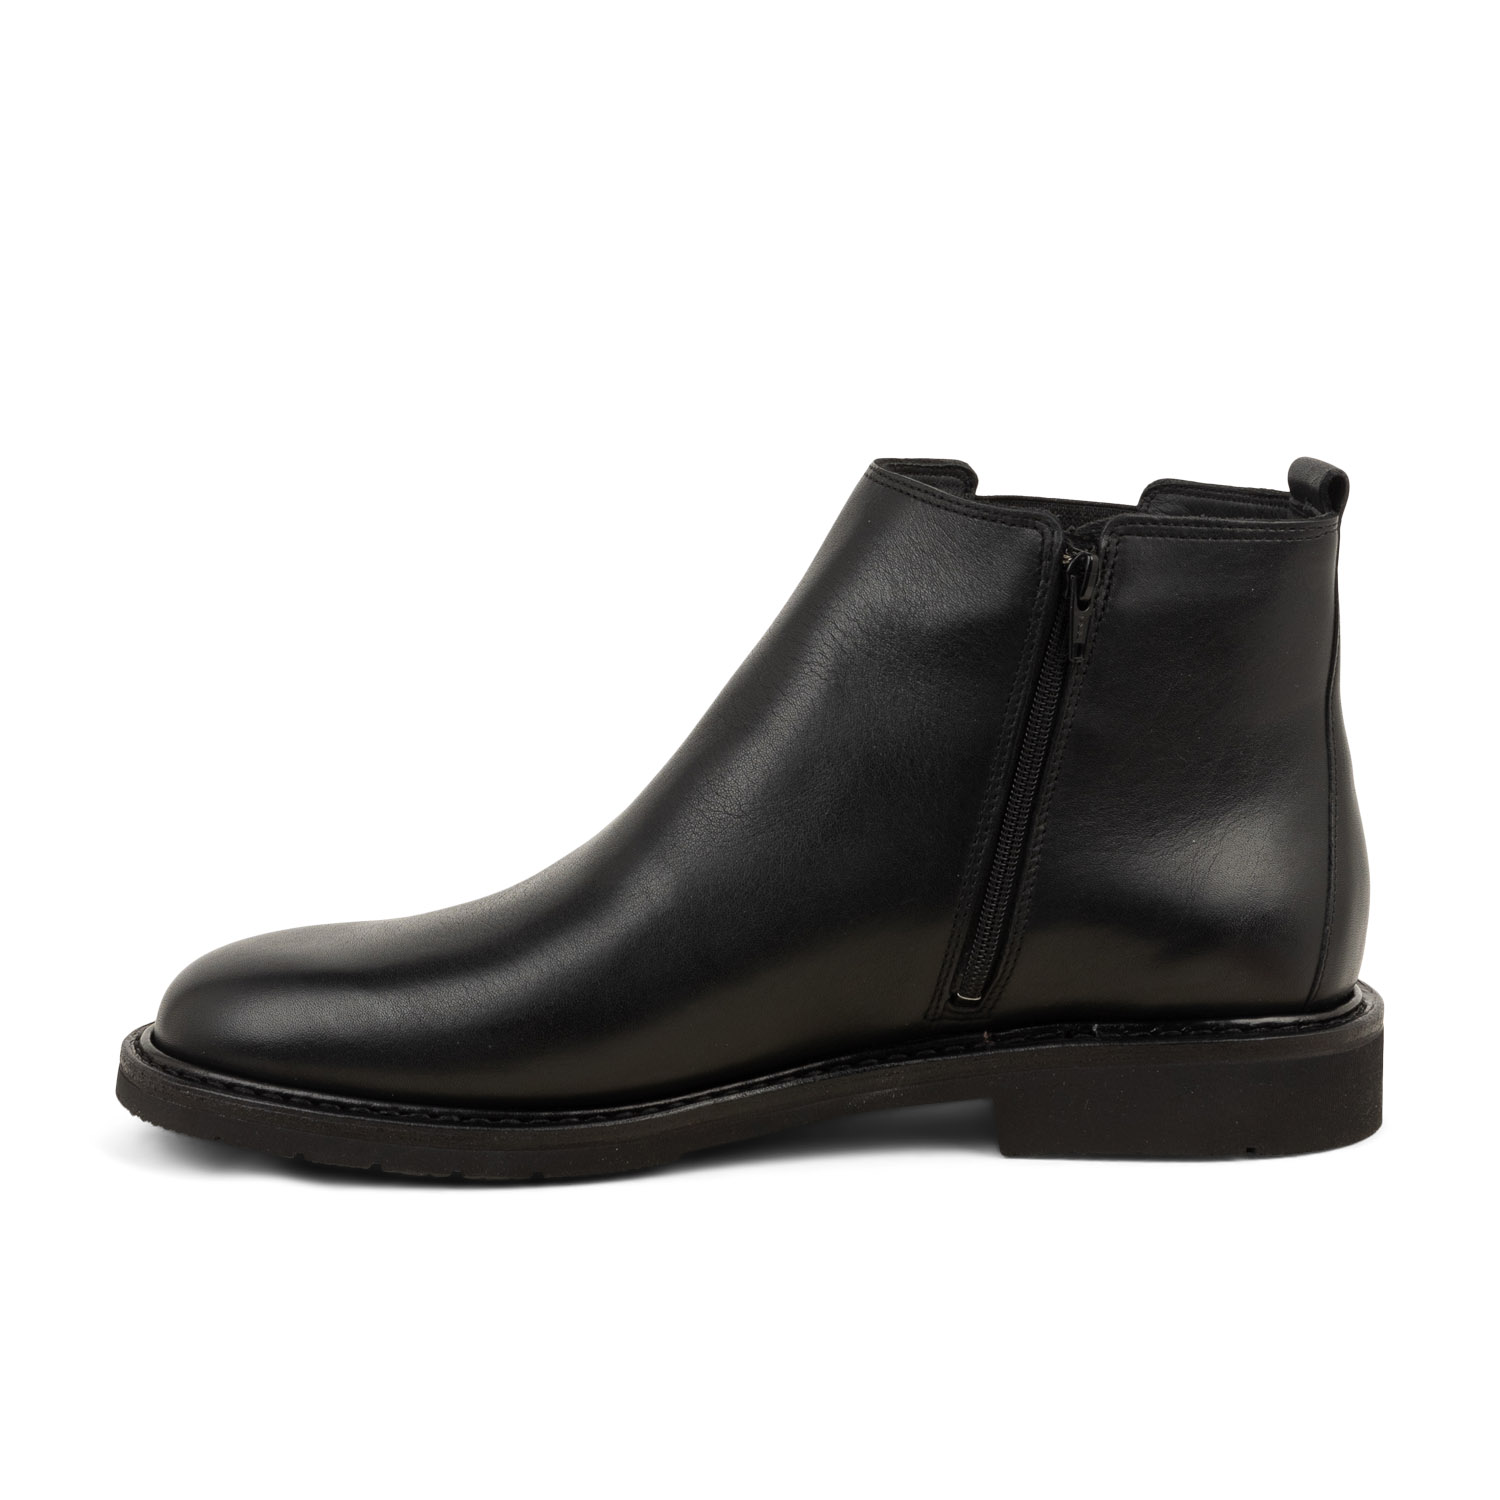 04 - MURRAY - MEPHISTO - Boots et bottines - Cuir